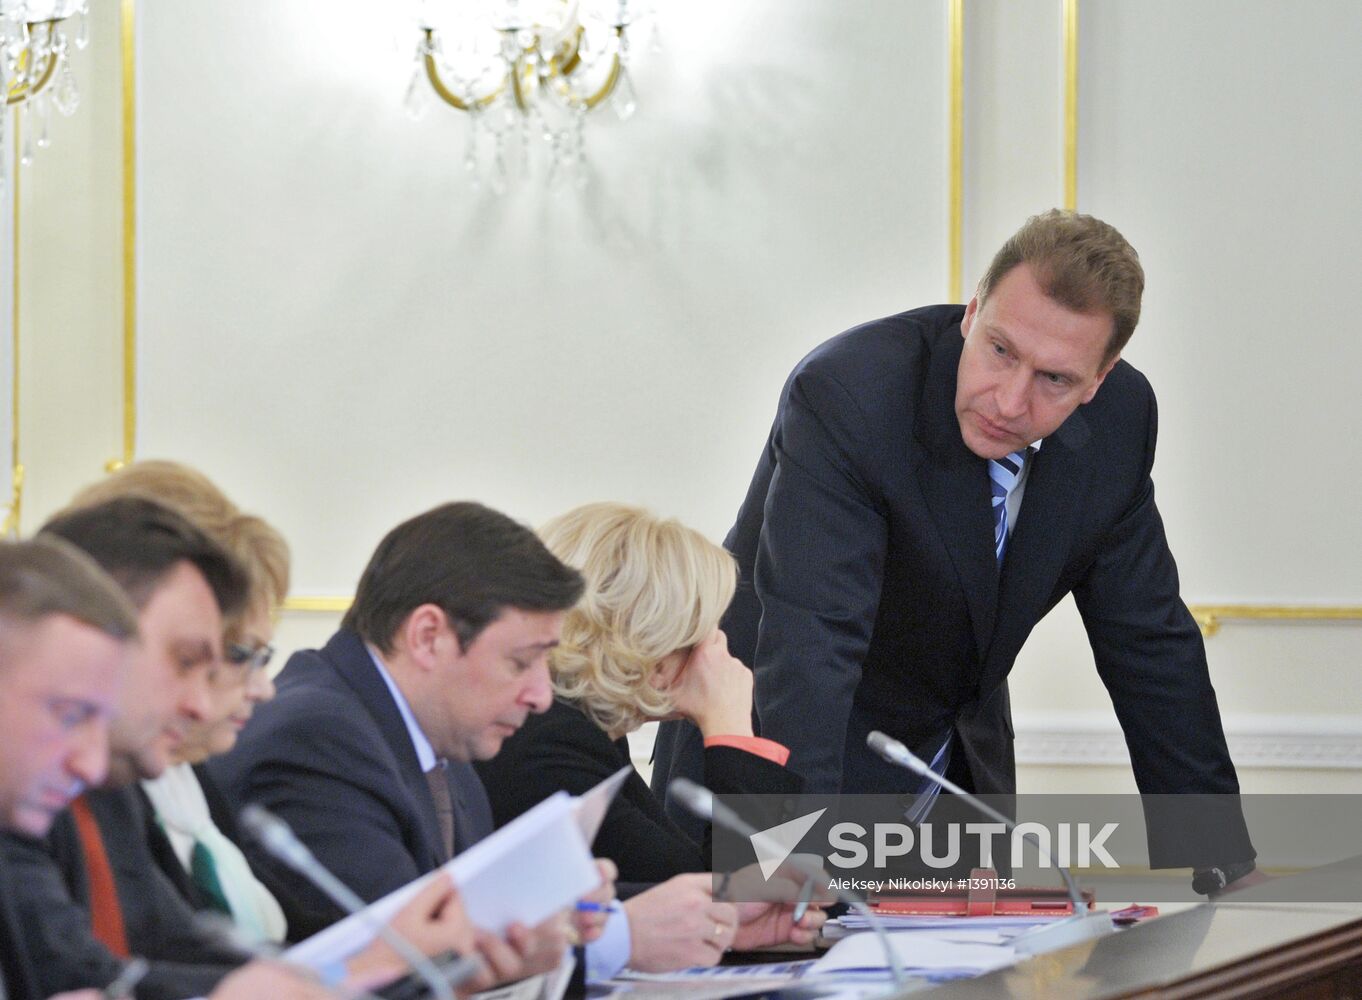 V.Putin chairs meeting on national projects & demographic policy